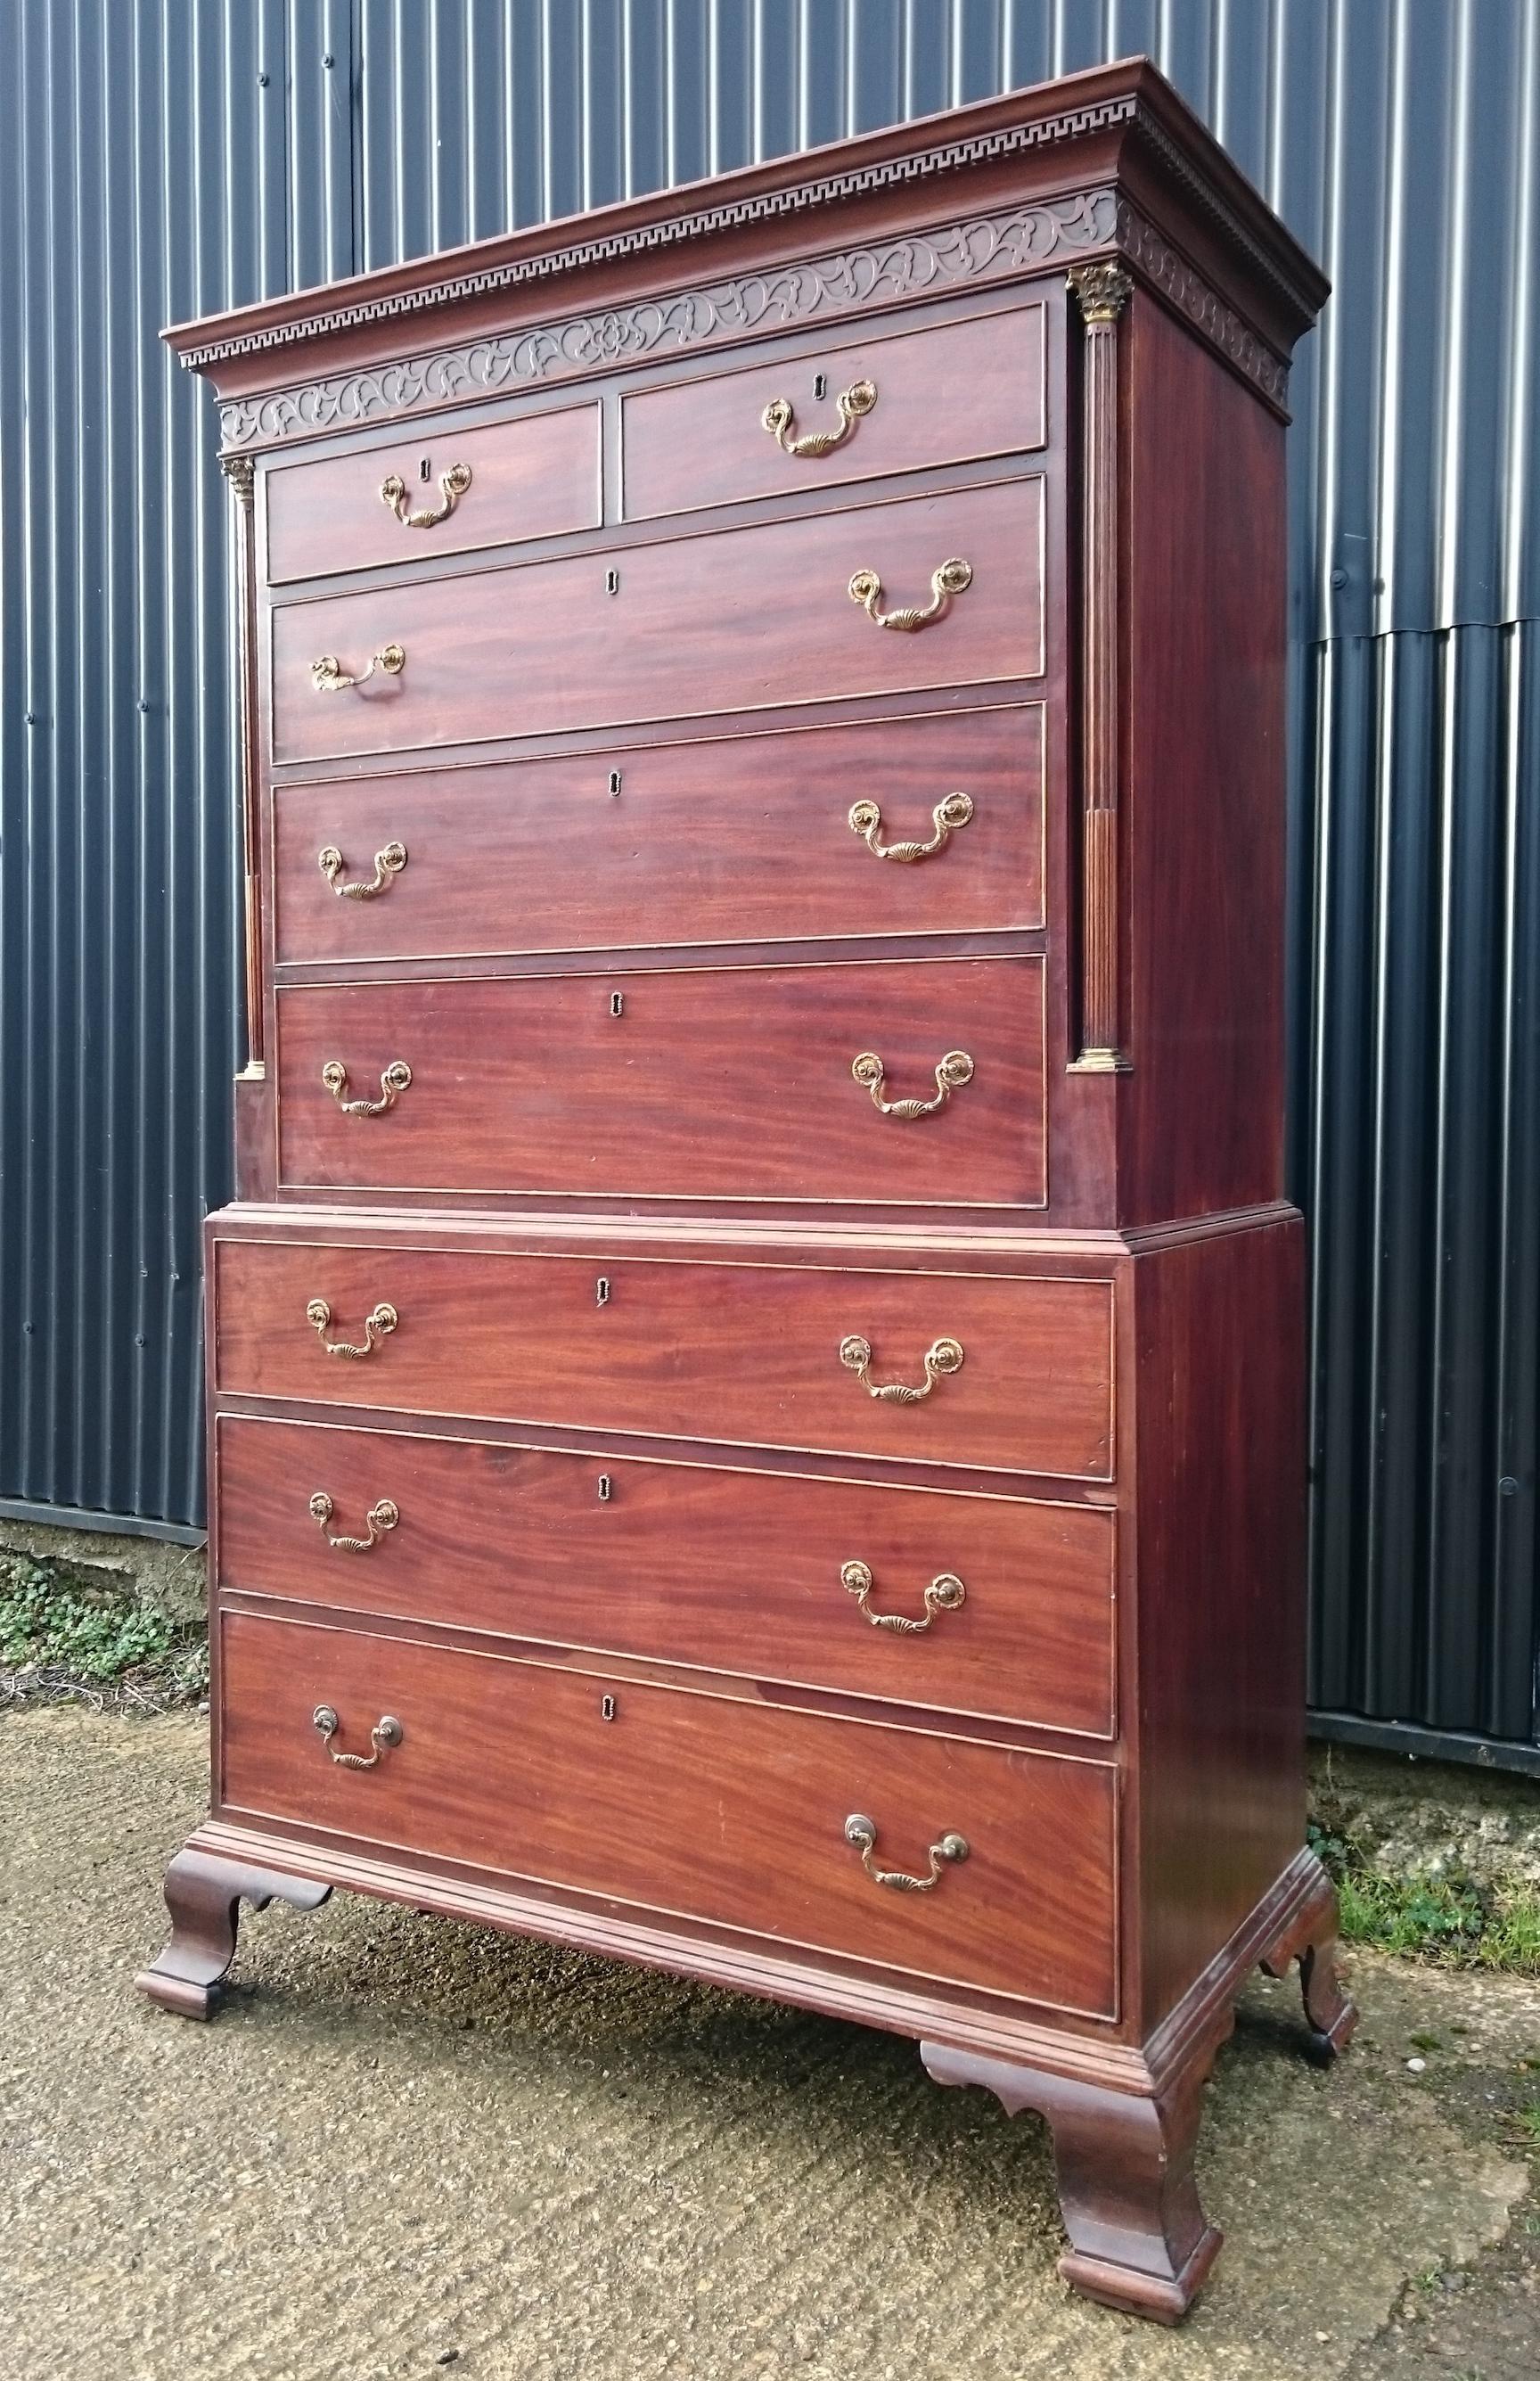 18th century George III period antique mahogany chest on chest. This is a great chest on chest with some lovely details. The ogee bracket feet are a generous shape, the pillasters have fluting and gilt brass capitals, the handles still have traces